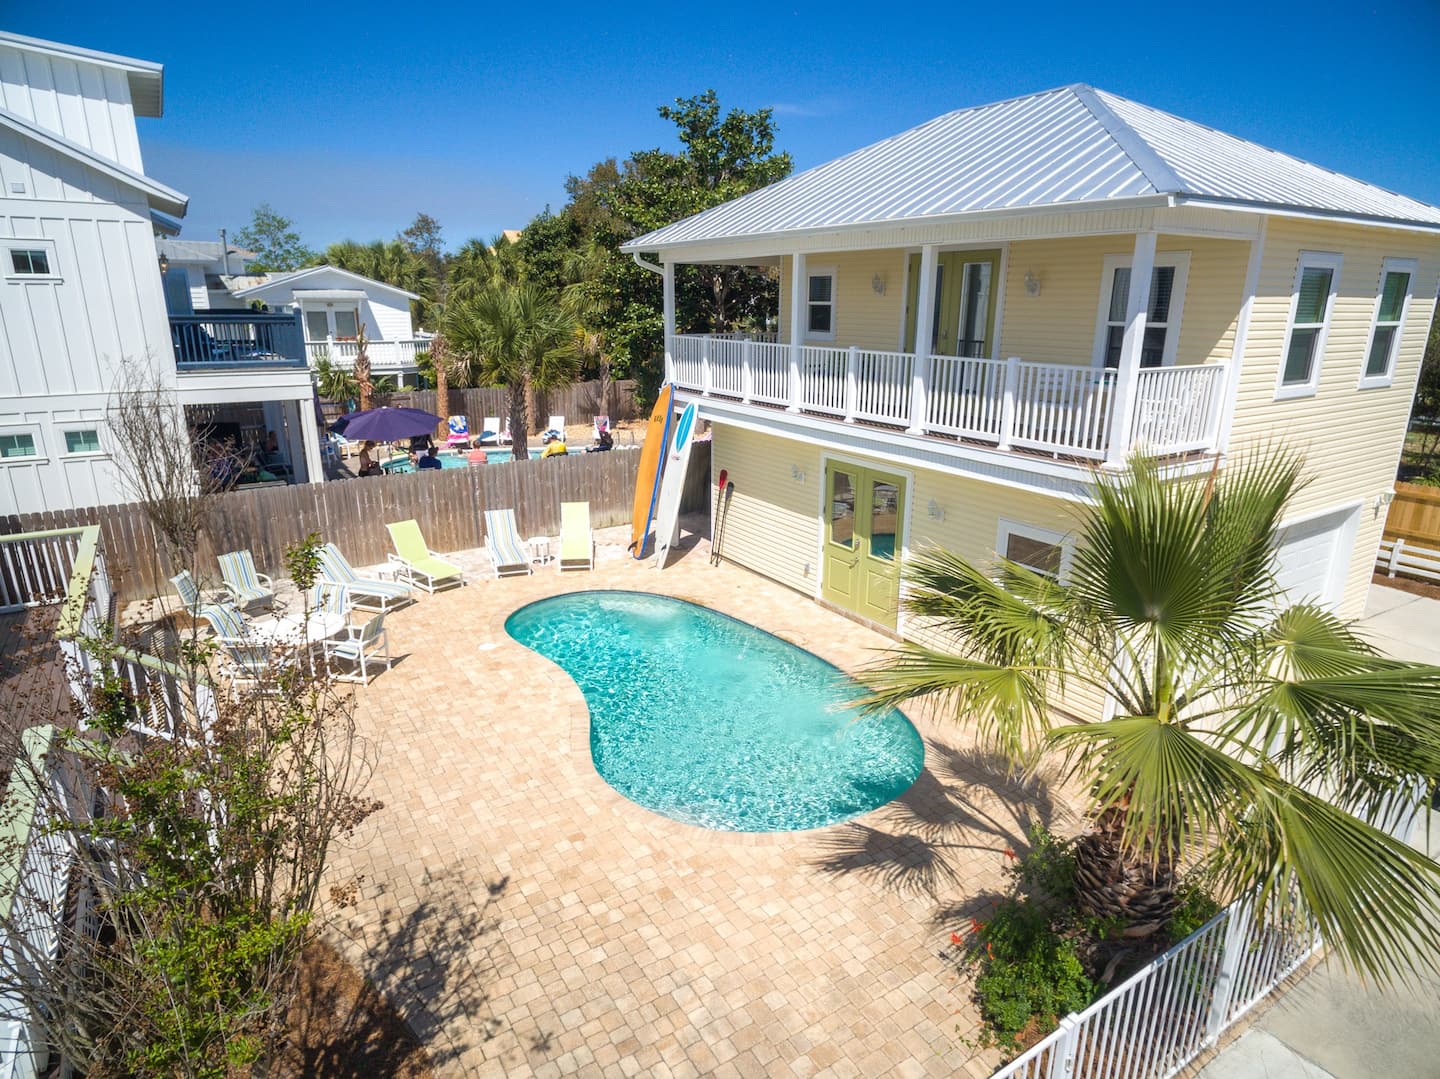 Carriage House, one of the best Airbnbs in Destin Florida